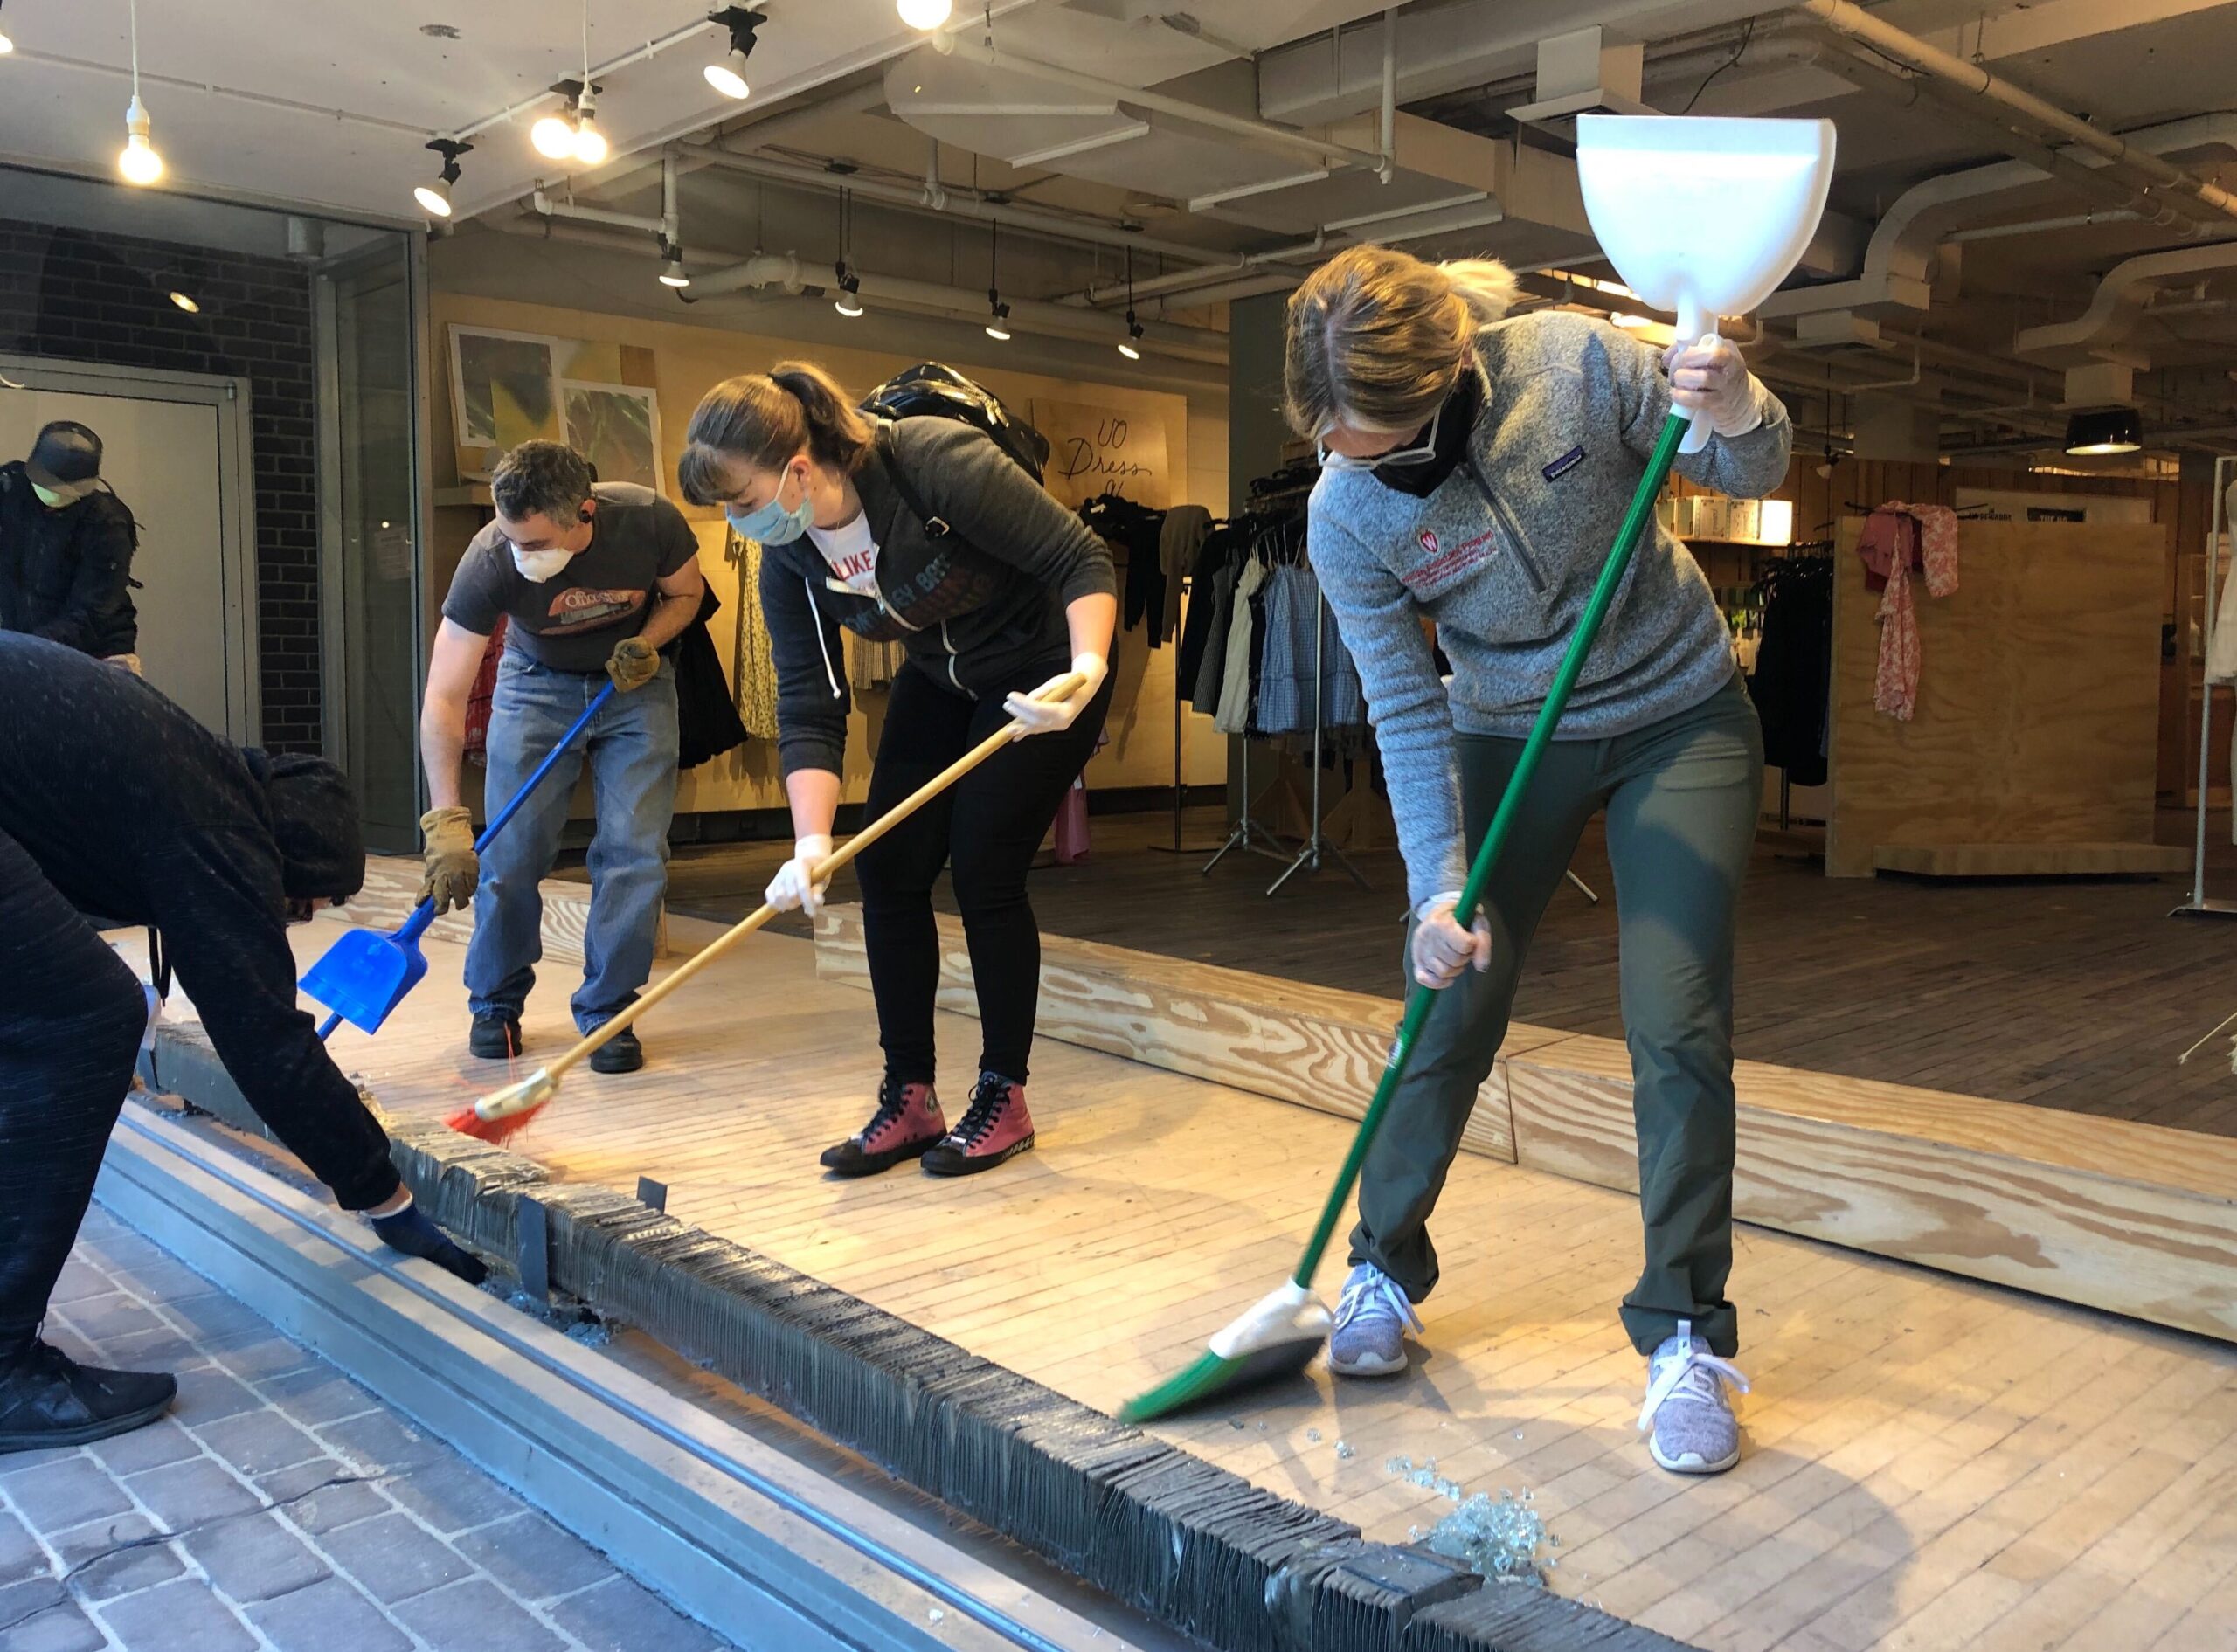 Volunteers work to clean up Urban Outfitters